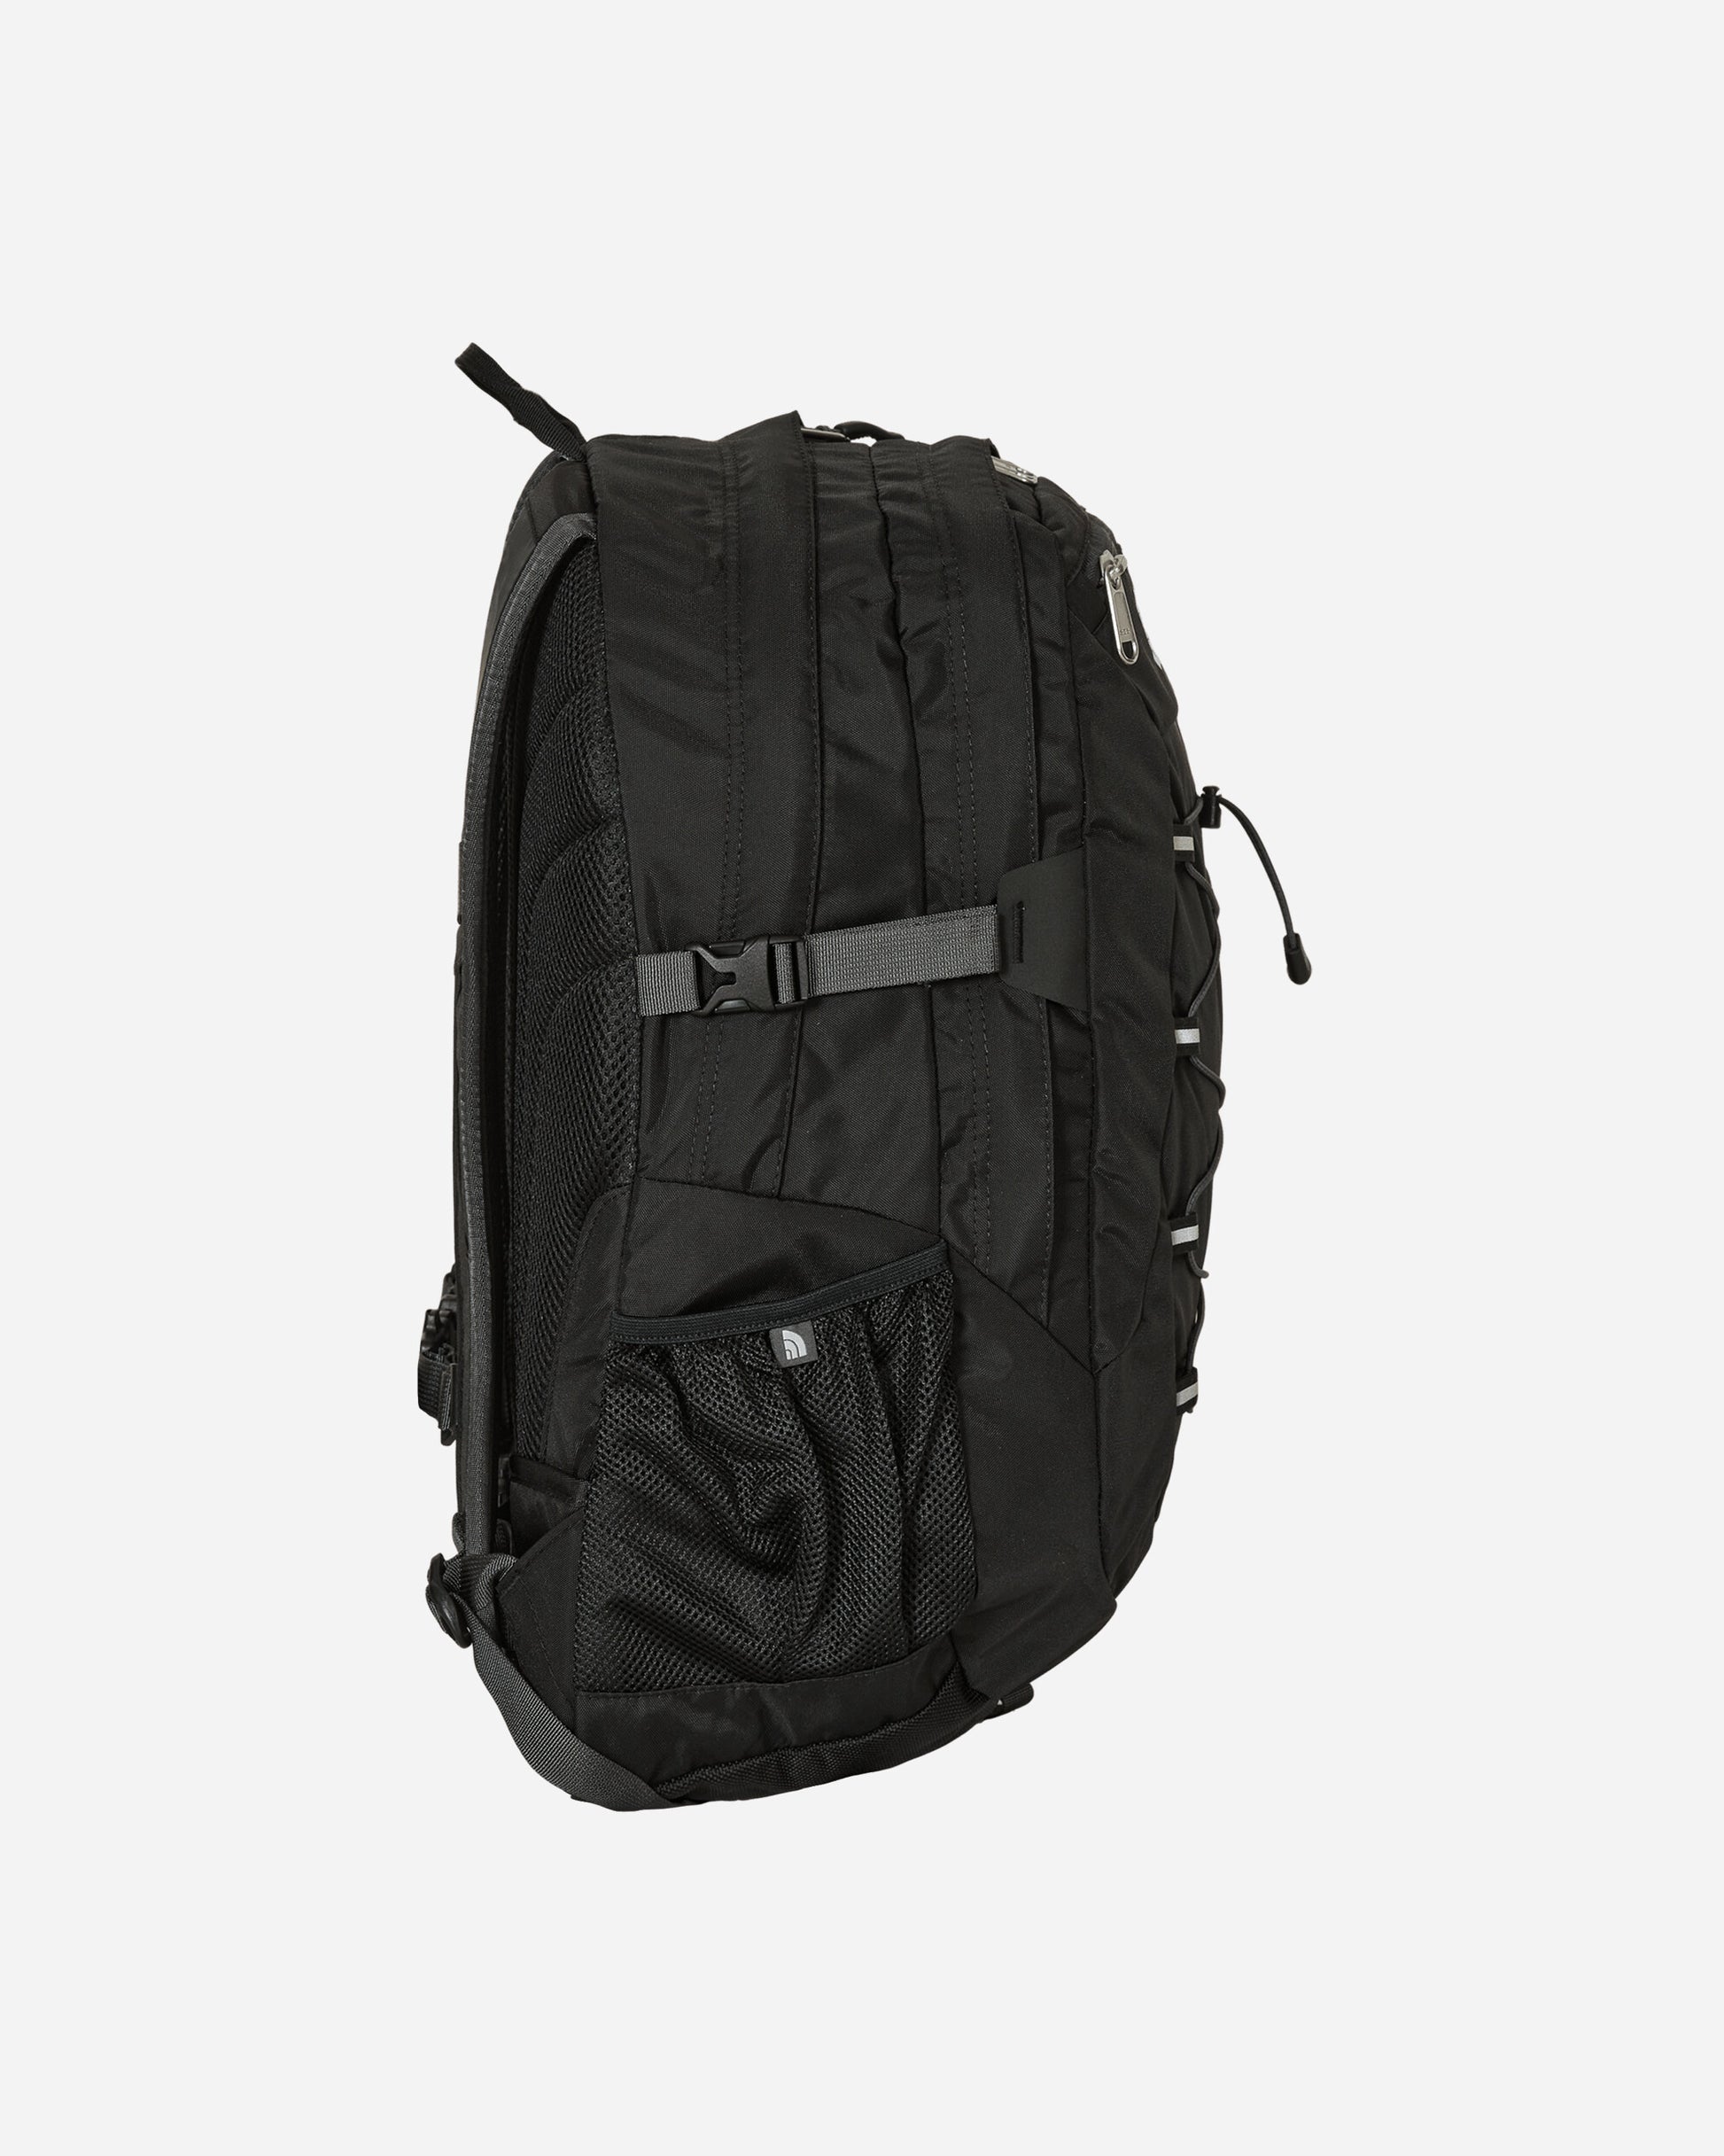 The North Face Borealis Classic Tnf Black/Asphalt Grey Bags and Backpacks Backpacks NF00CF9C KT01